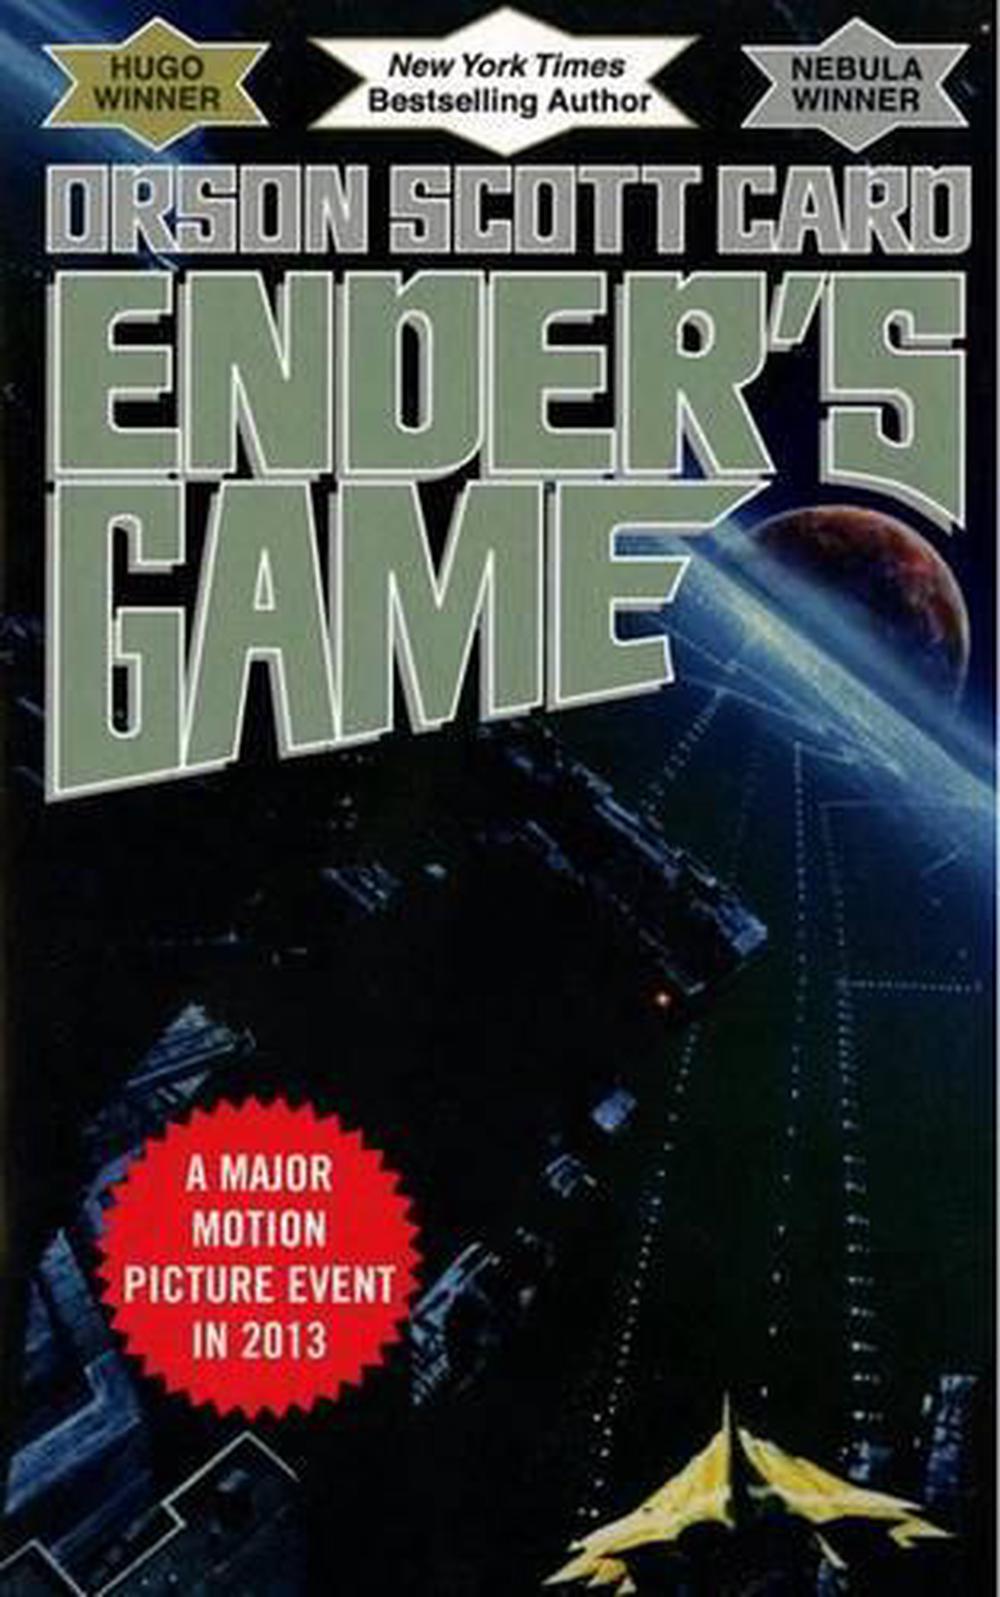 book review of ender's game